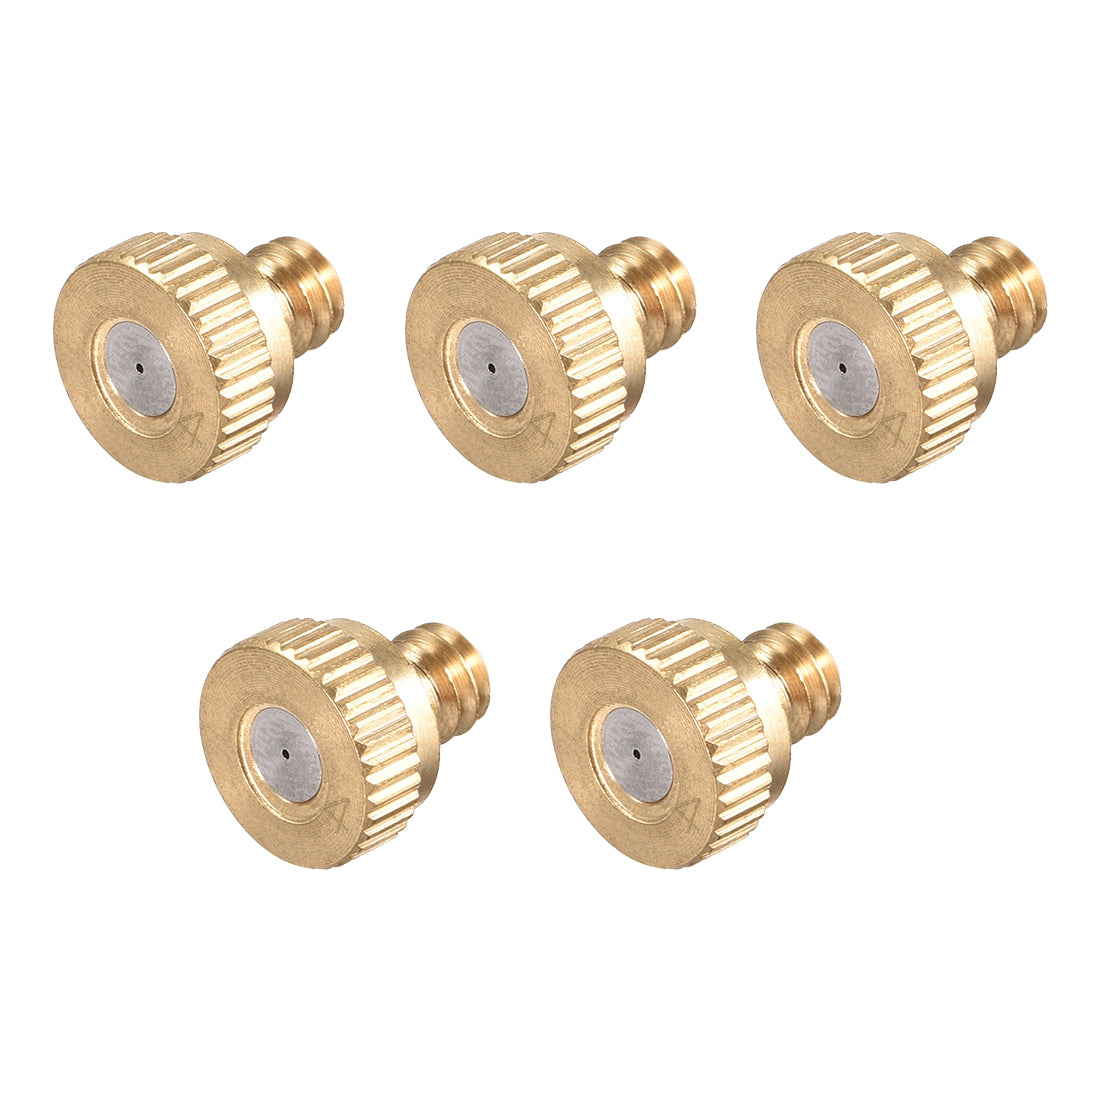 uxcell Uxcell Brass Misting Nozzle - 10/24 UNC Replacement Heads for Outdoor Cooling System - 5 Pcs